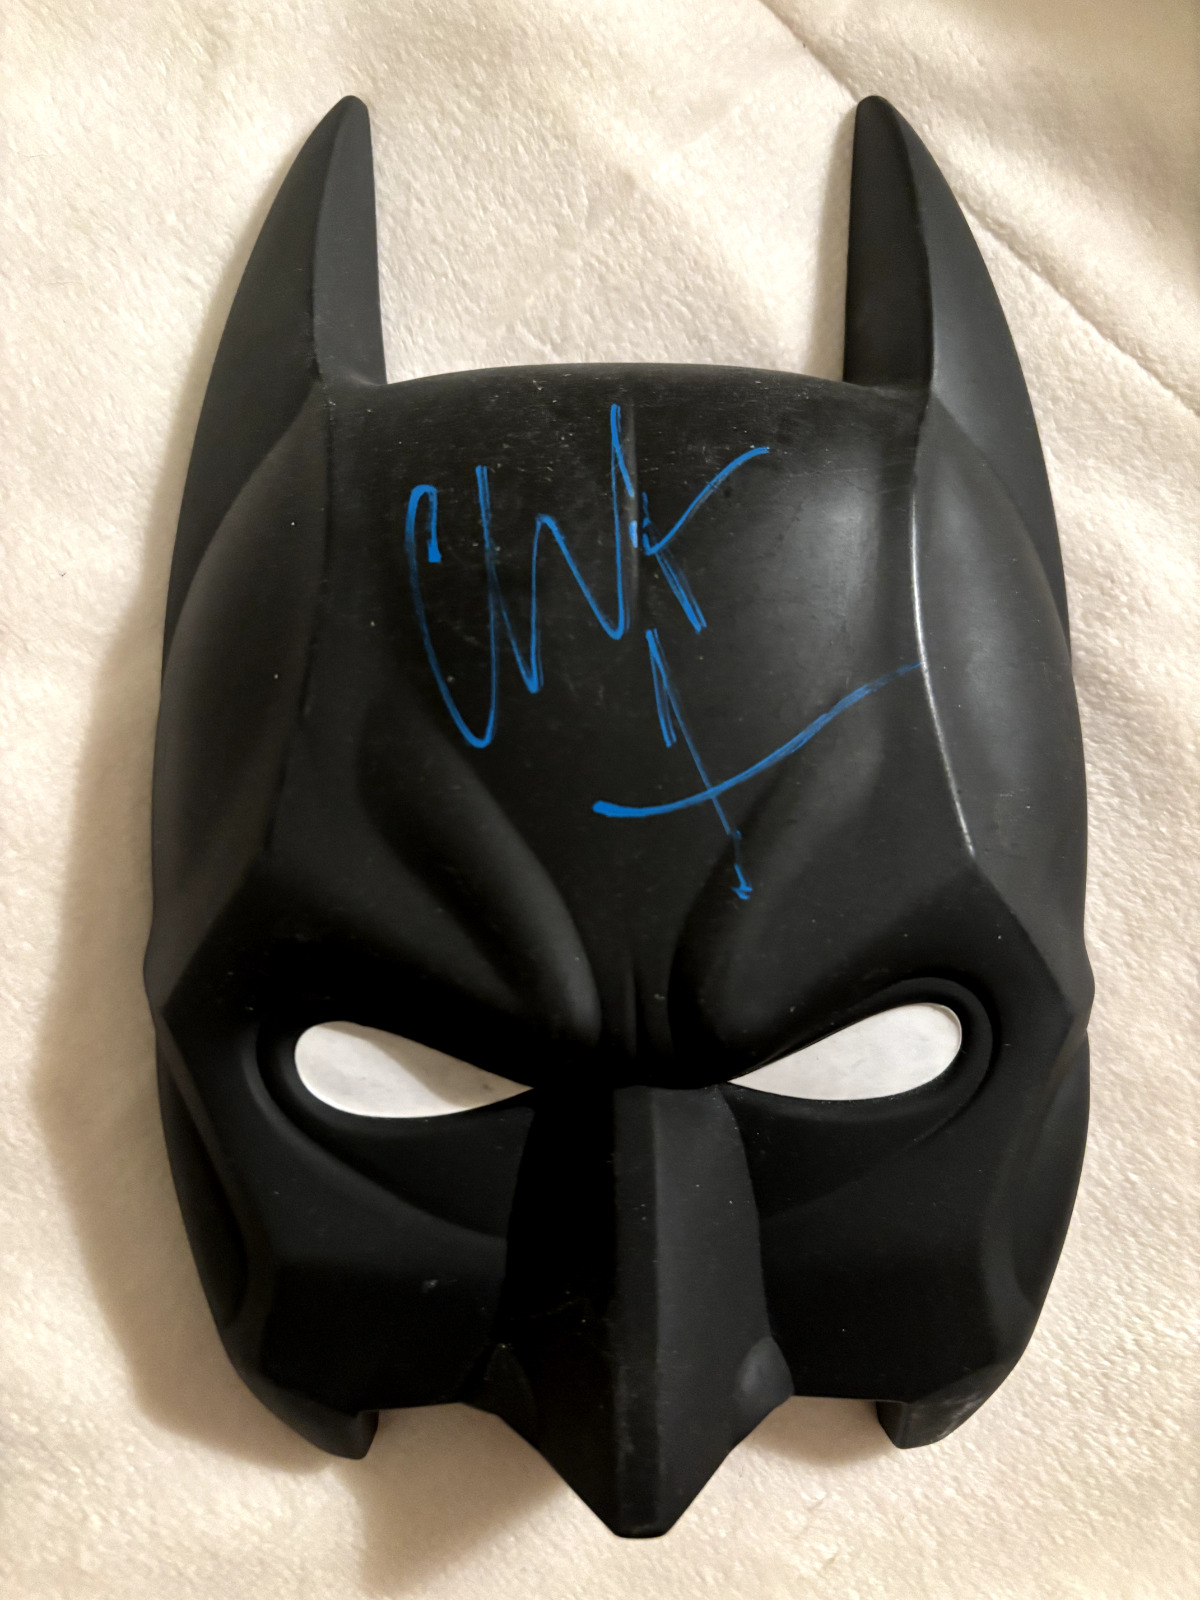 The Dark Knight (Limited Edition Mask & 2 DVDs) SIGNED by Christian Bale